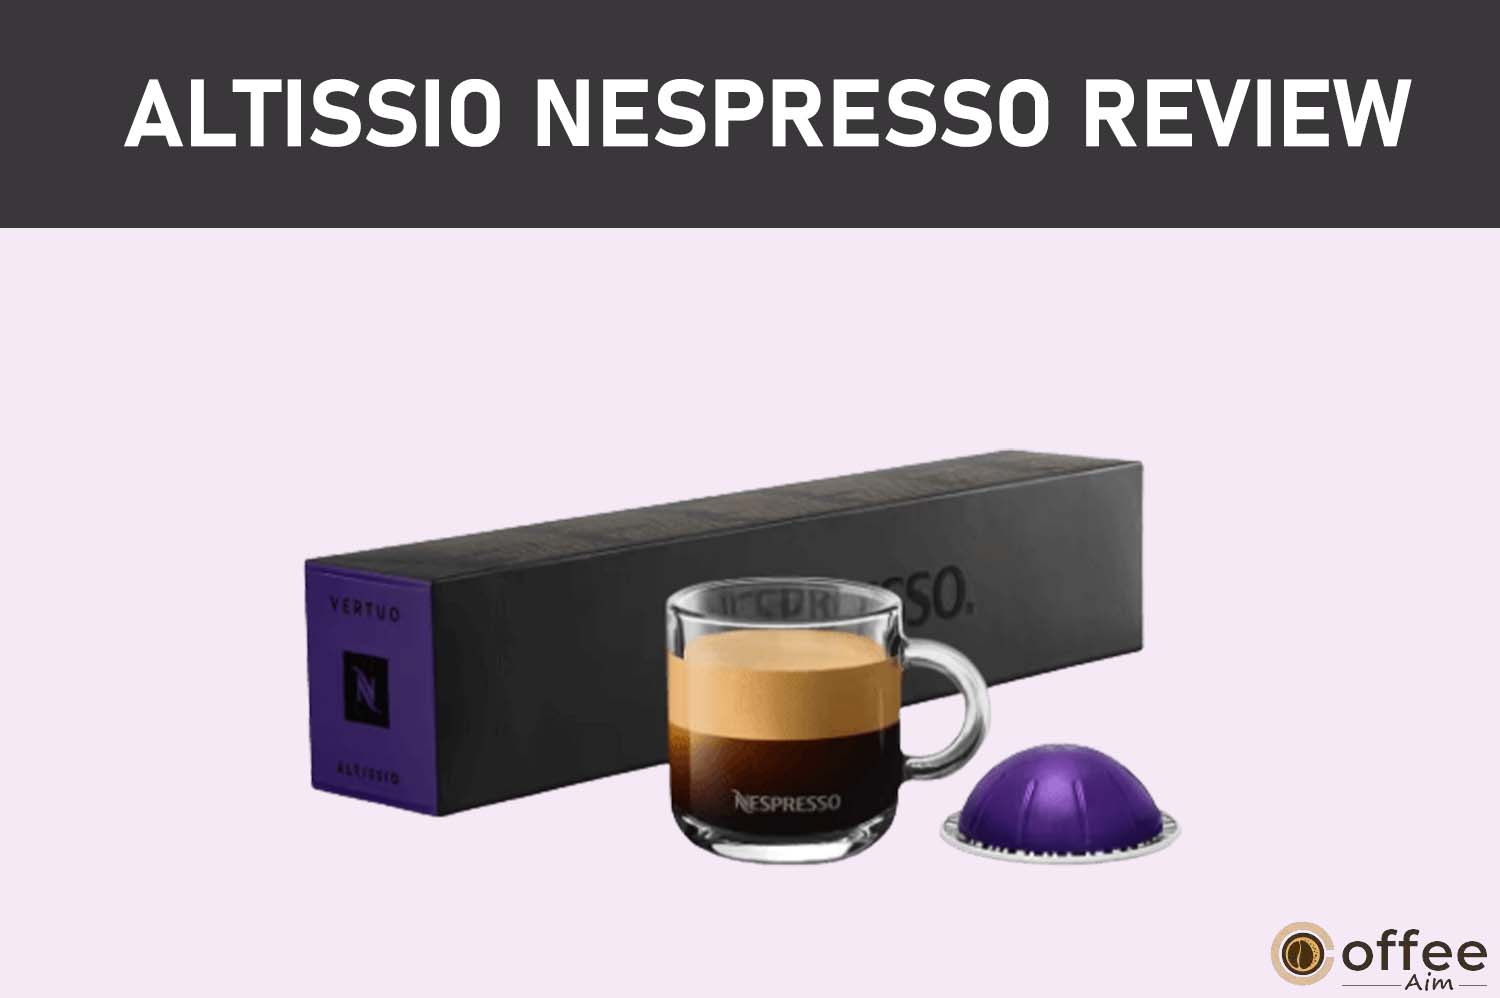 Featured image for the article "Altissio Nespresso Review"